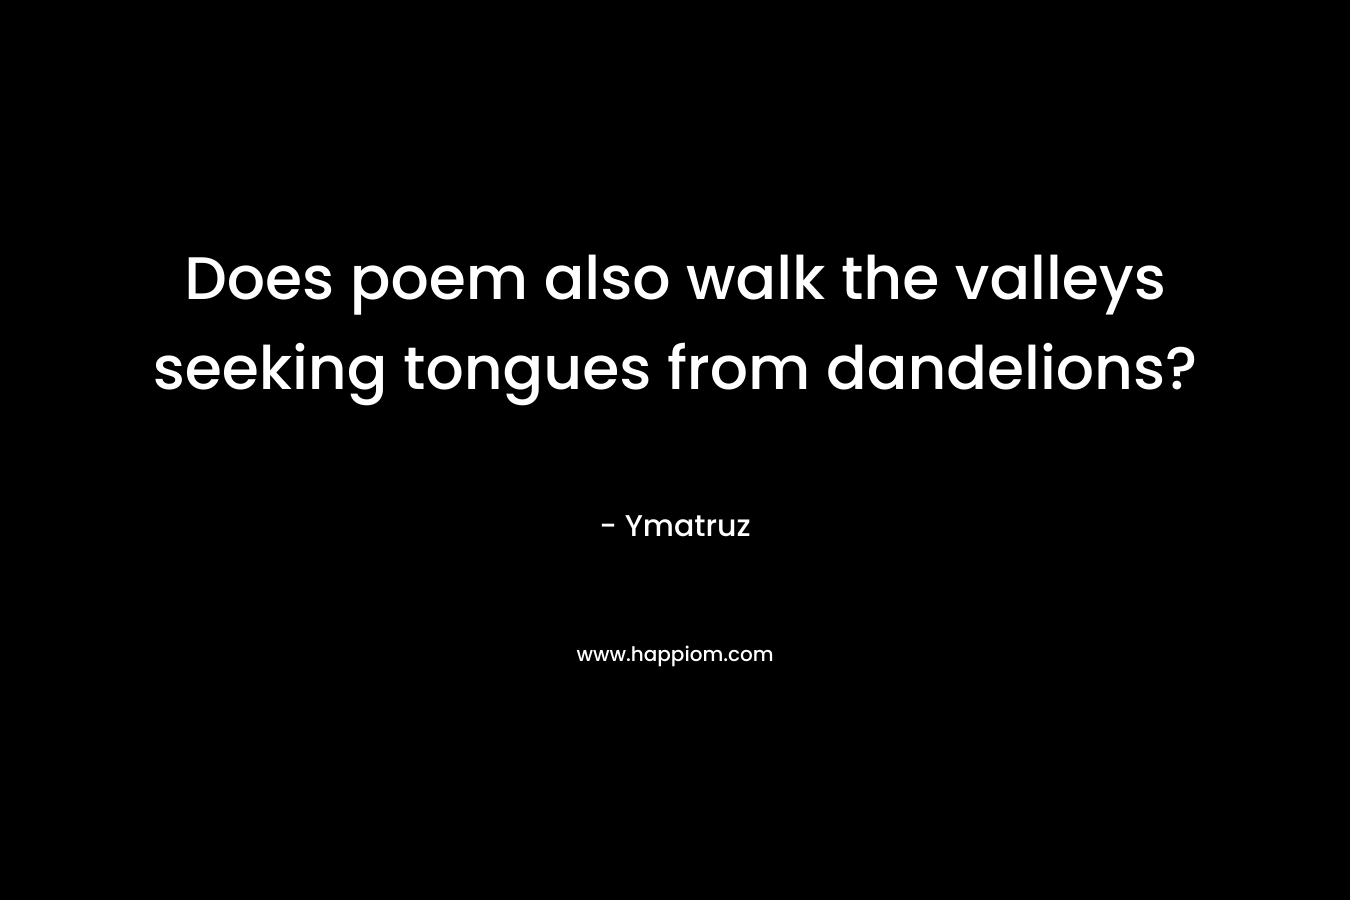 Does poem also walk the valleys seeking tongues from dandelions?